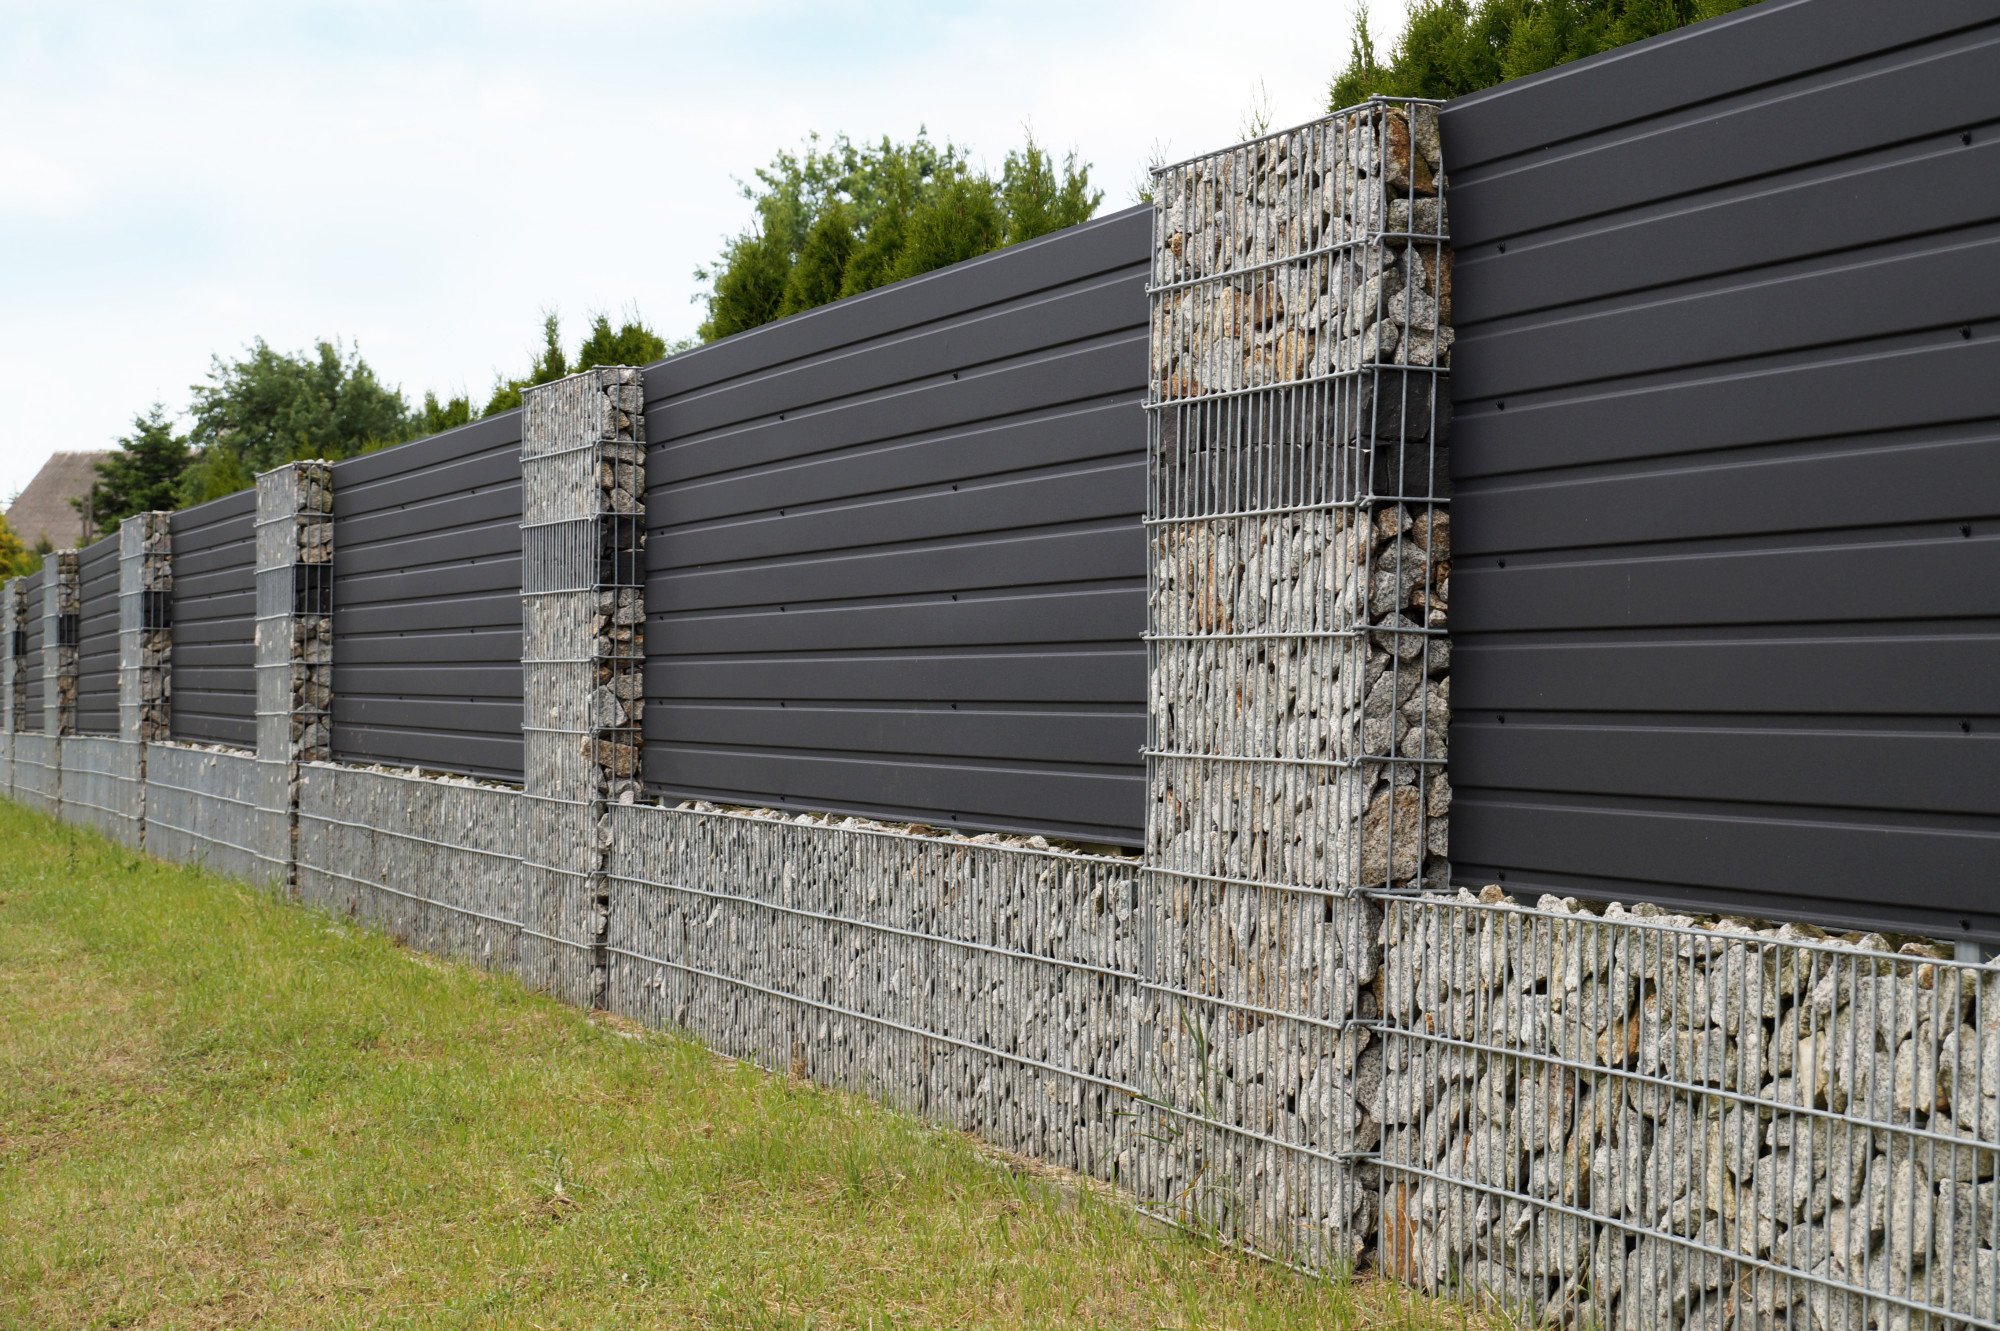 Are you ready to bring a modern look to the exterior of your home? Click here to learn more about inspiring horizontal fence ideas to transform your yard.